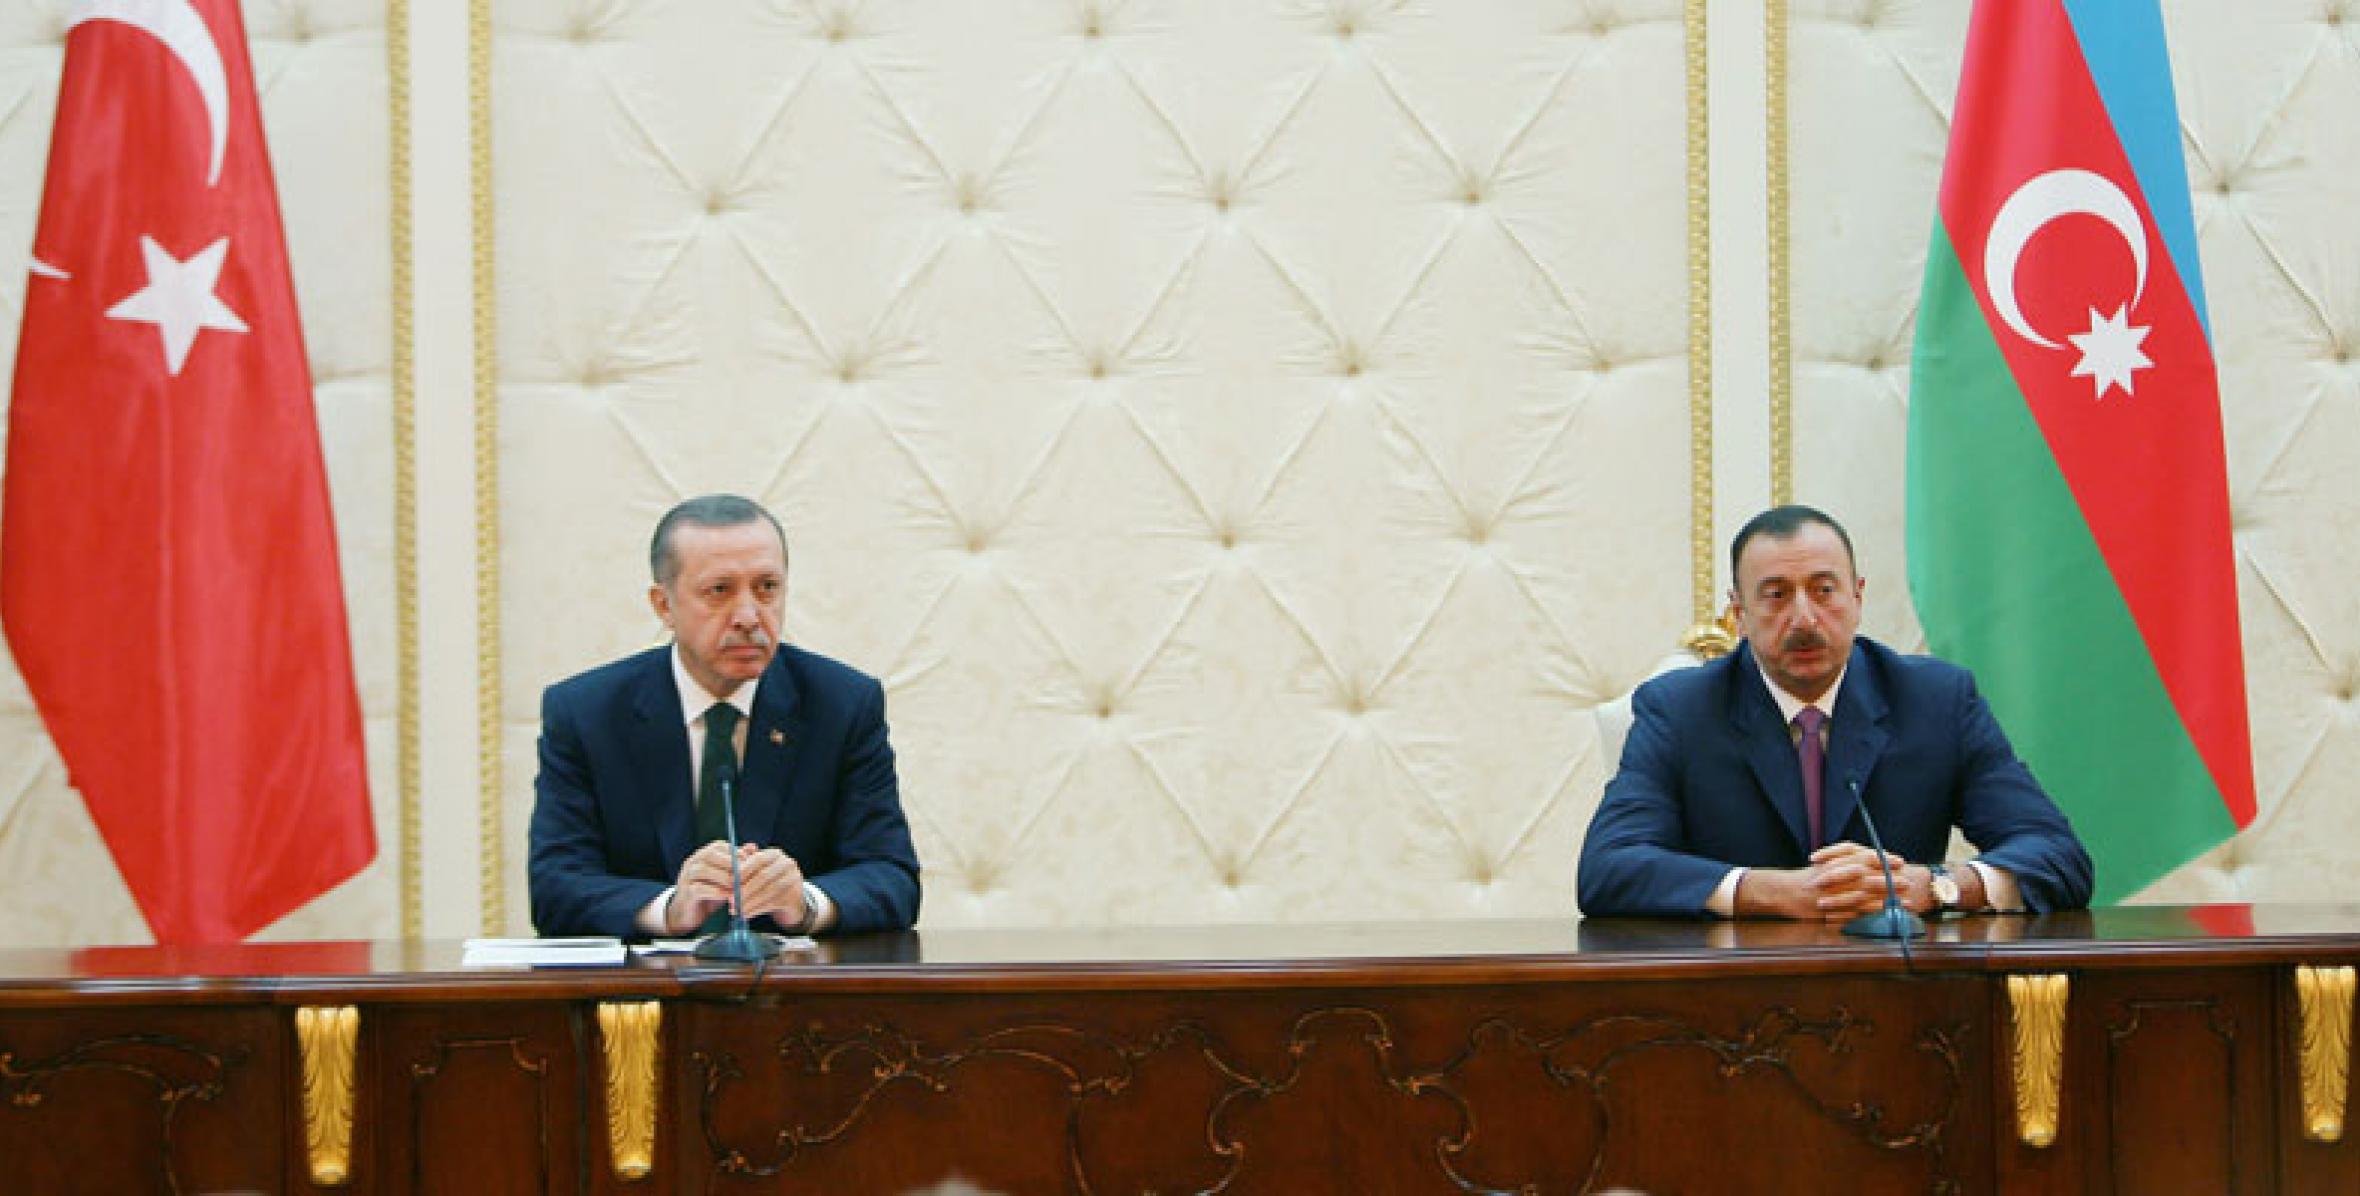 Azerbaijan President and Turkish Prime Minister held a press conference